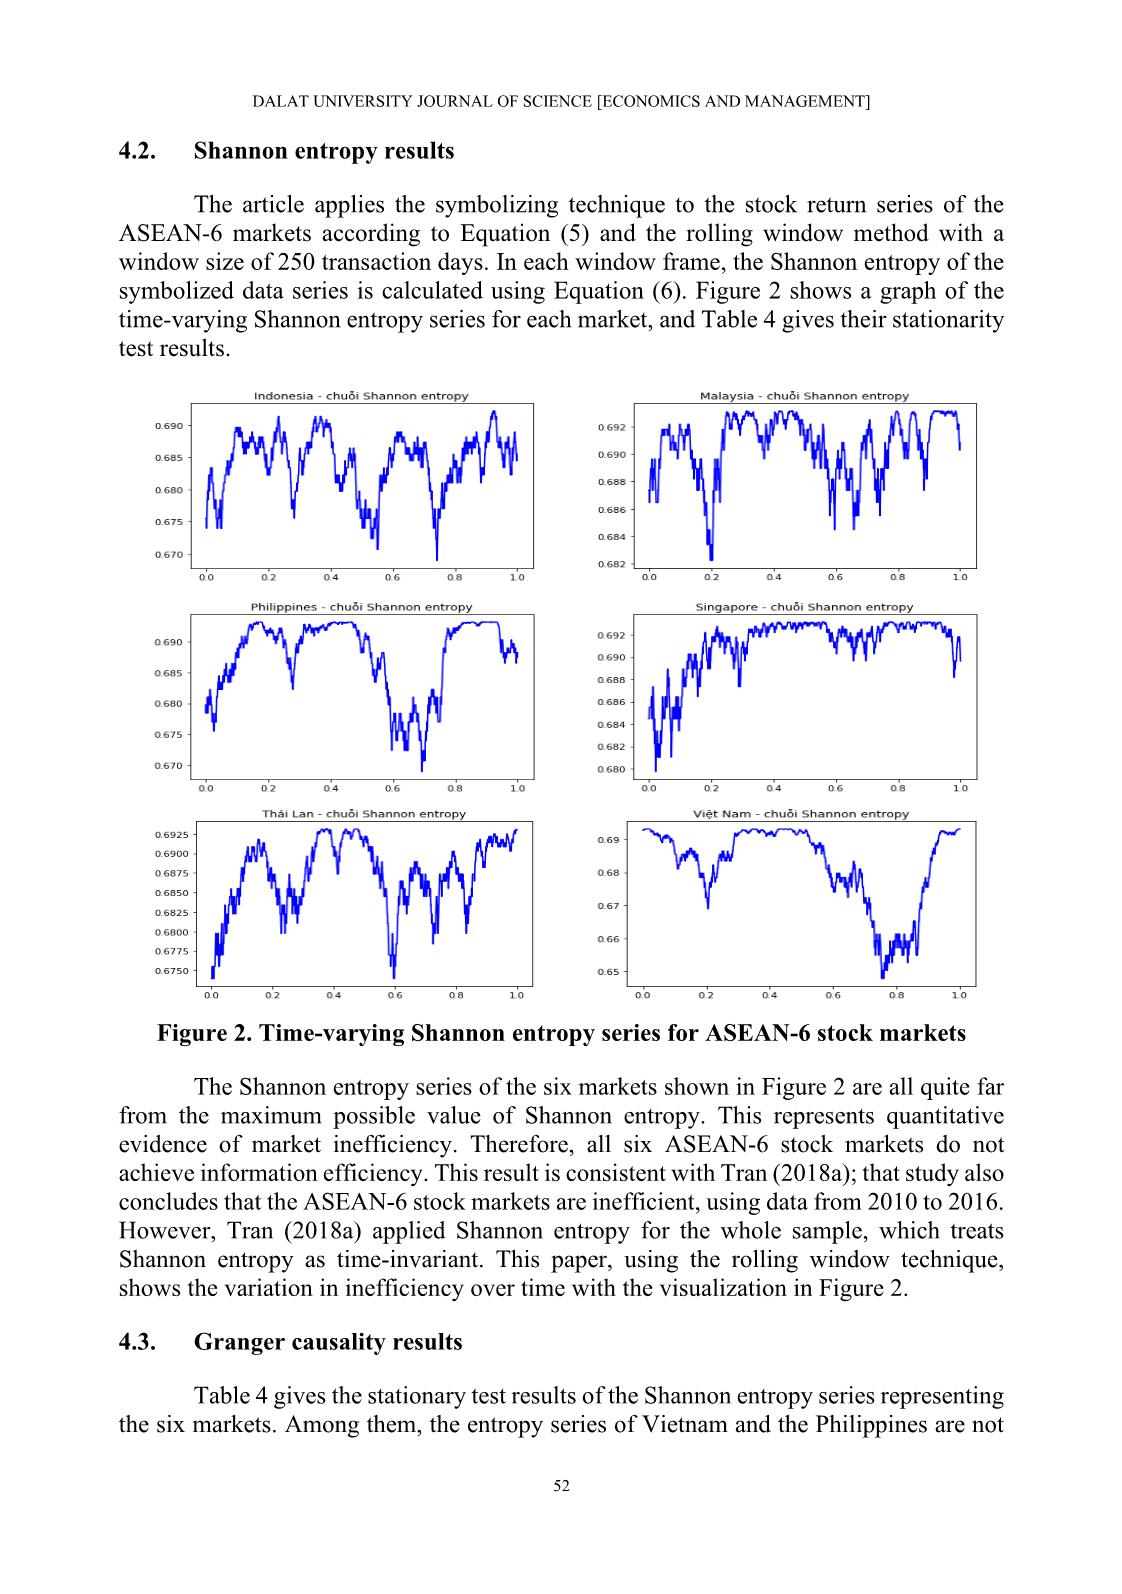 Investigating the relationships between asean stock markets: an approach using the granger causality test of time-Varying information efficiency trang 10